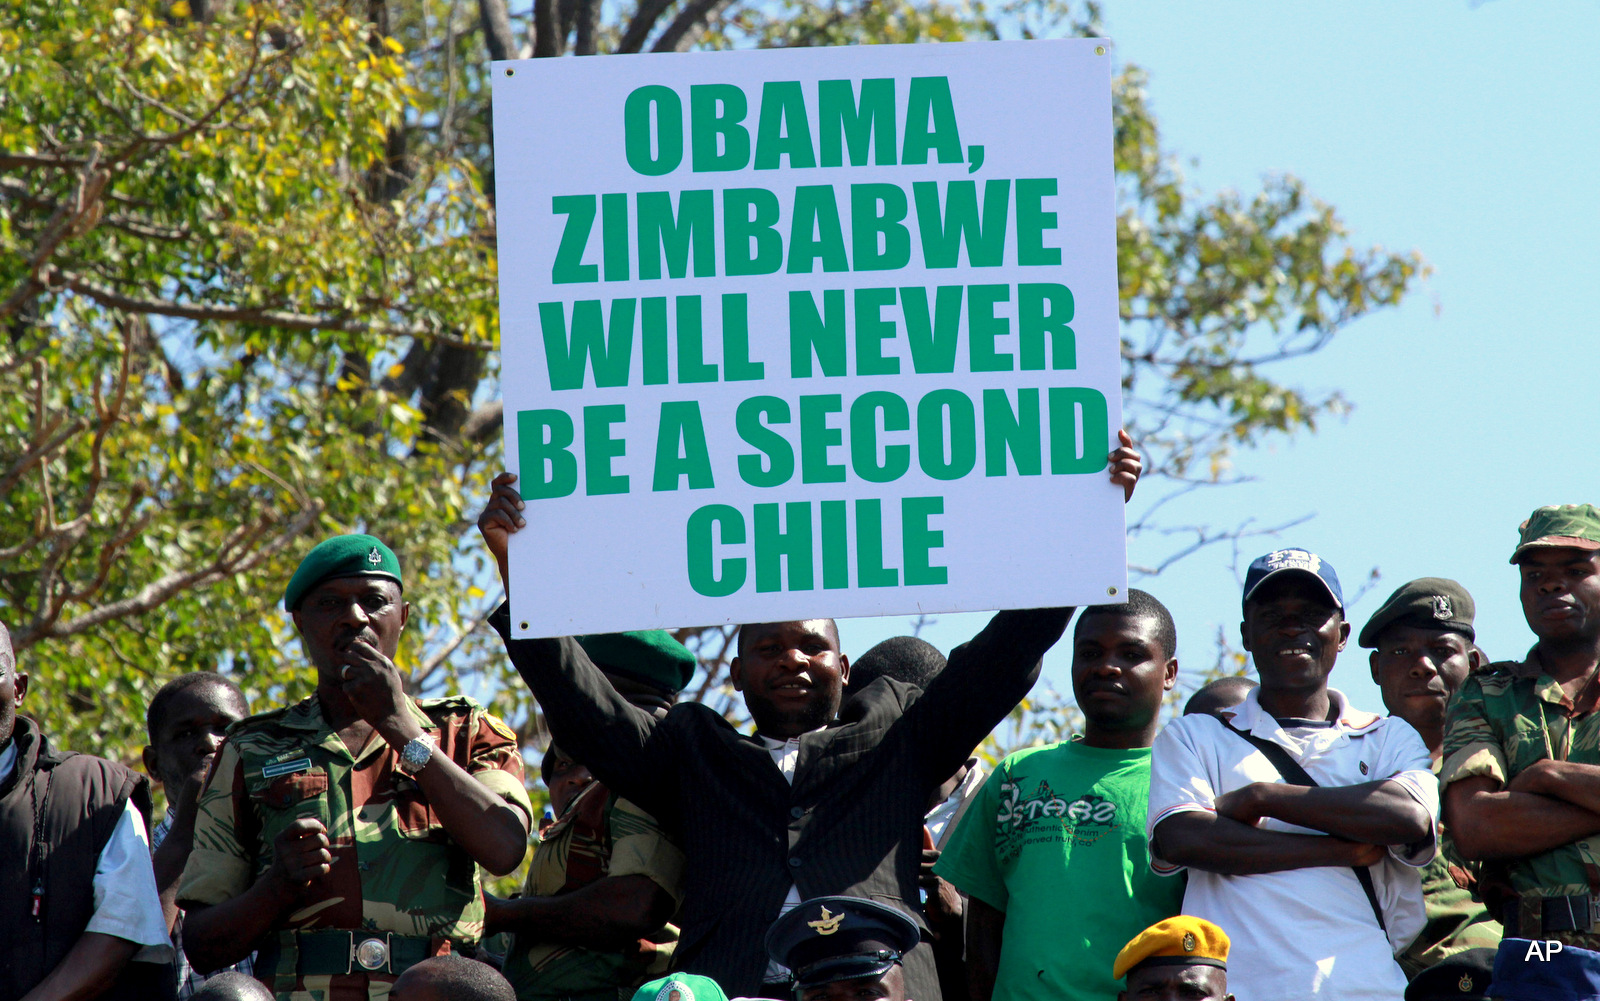 A man holds a poster with a message for United States President Barack Obama at Zimbabwe's Commemoration of Heroes day in Harare, Monday, Aug.12, 2013. Zimbabwean President elect Robert Mugabe was the guest speaker at the event. Mugabe recieved more than 60 percent of the vote in recent Presidential elections.